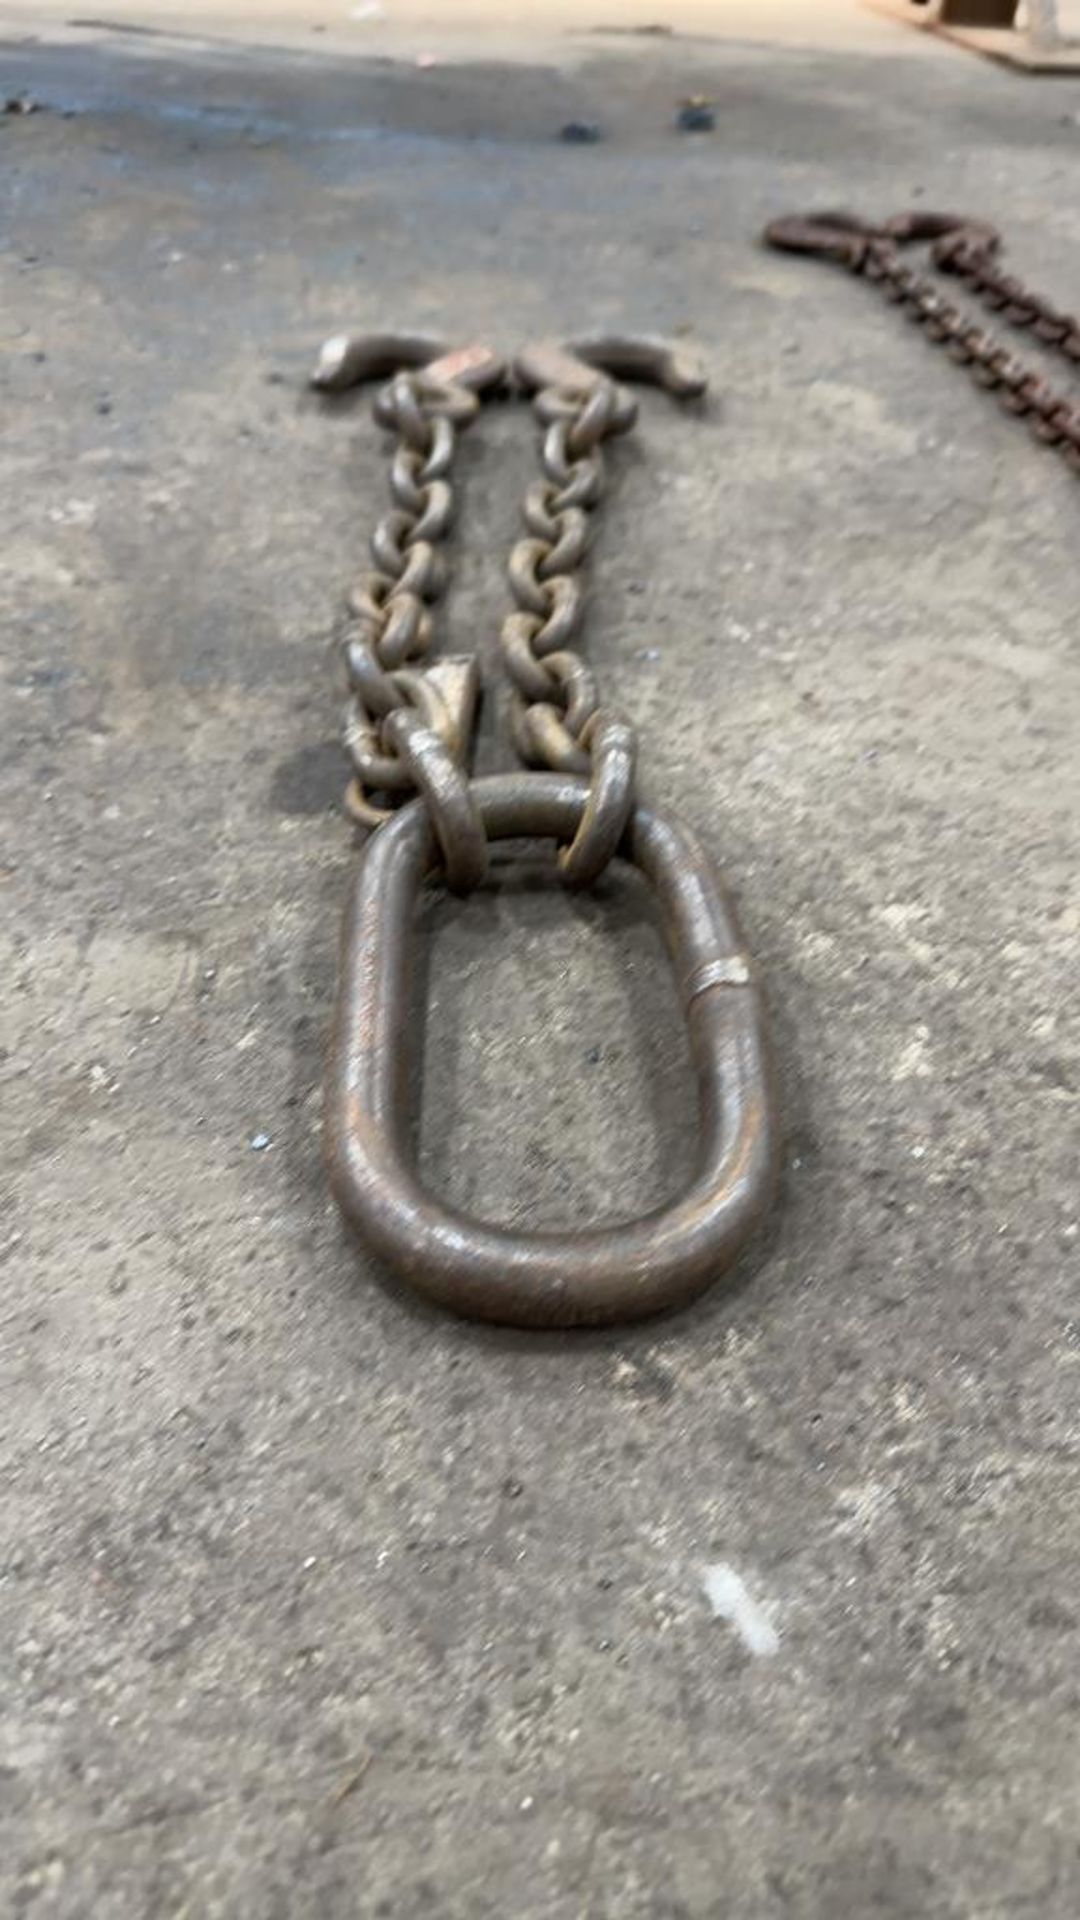 4ft & 2ft Chains on Rigging Rings with Hoist Hooks - Image 2 of 8